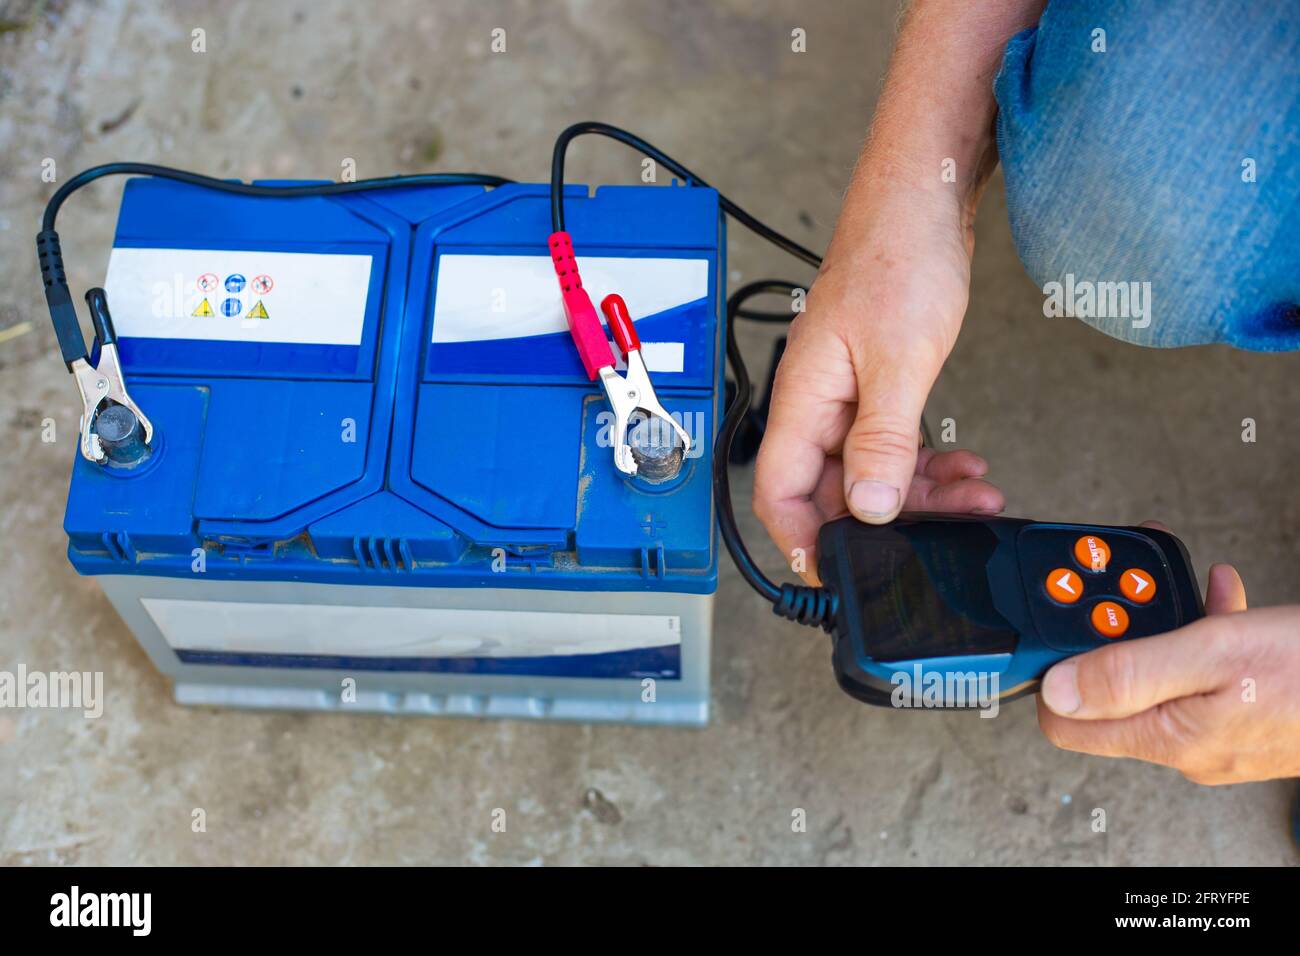 Testing the charging of VARTA car batteries with an electronic multimeter. Stock Photo